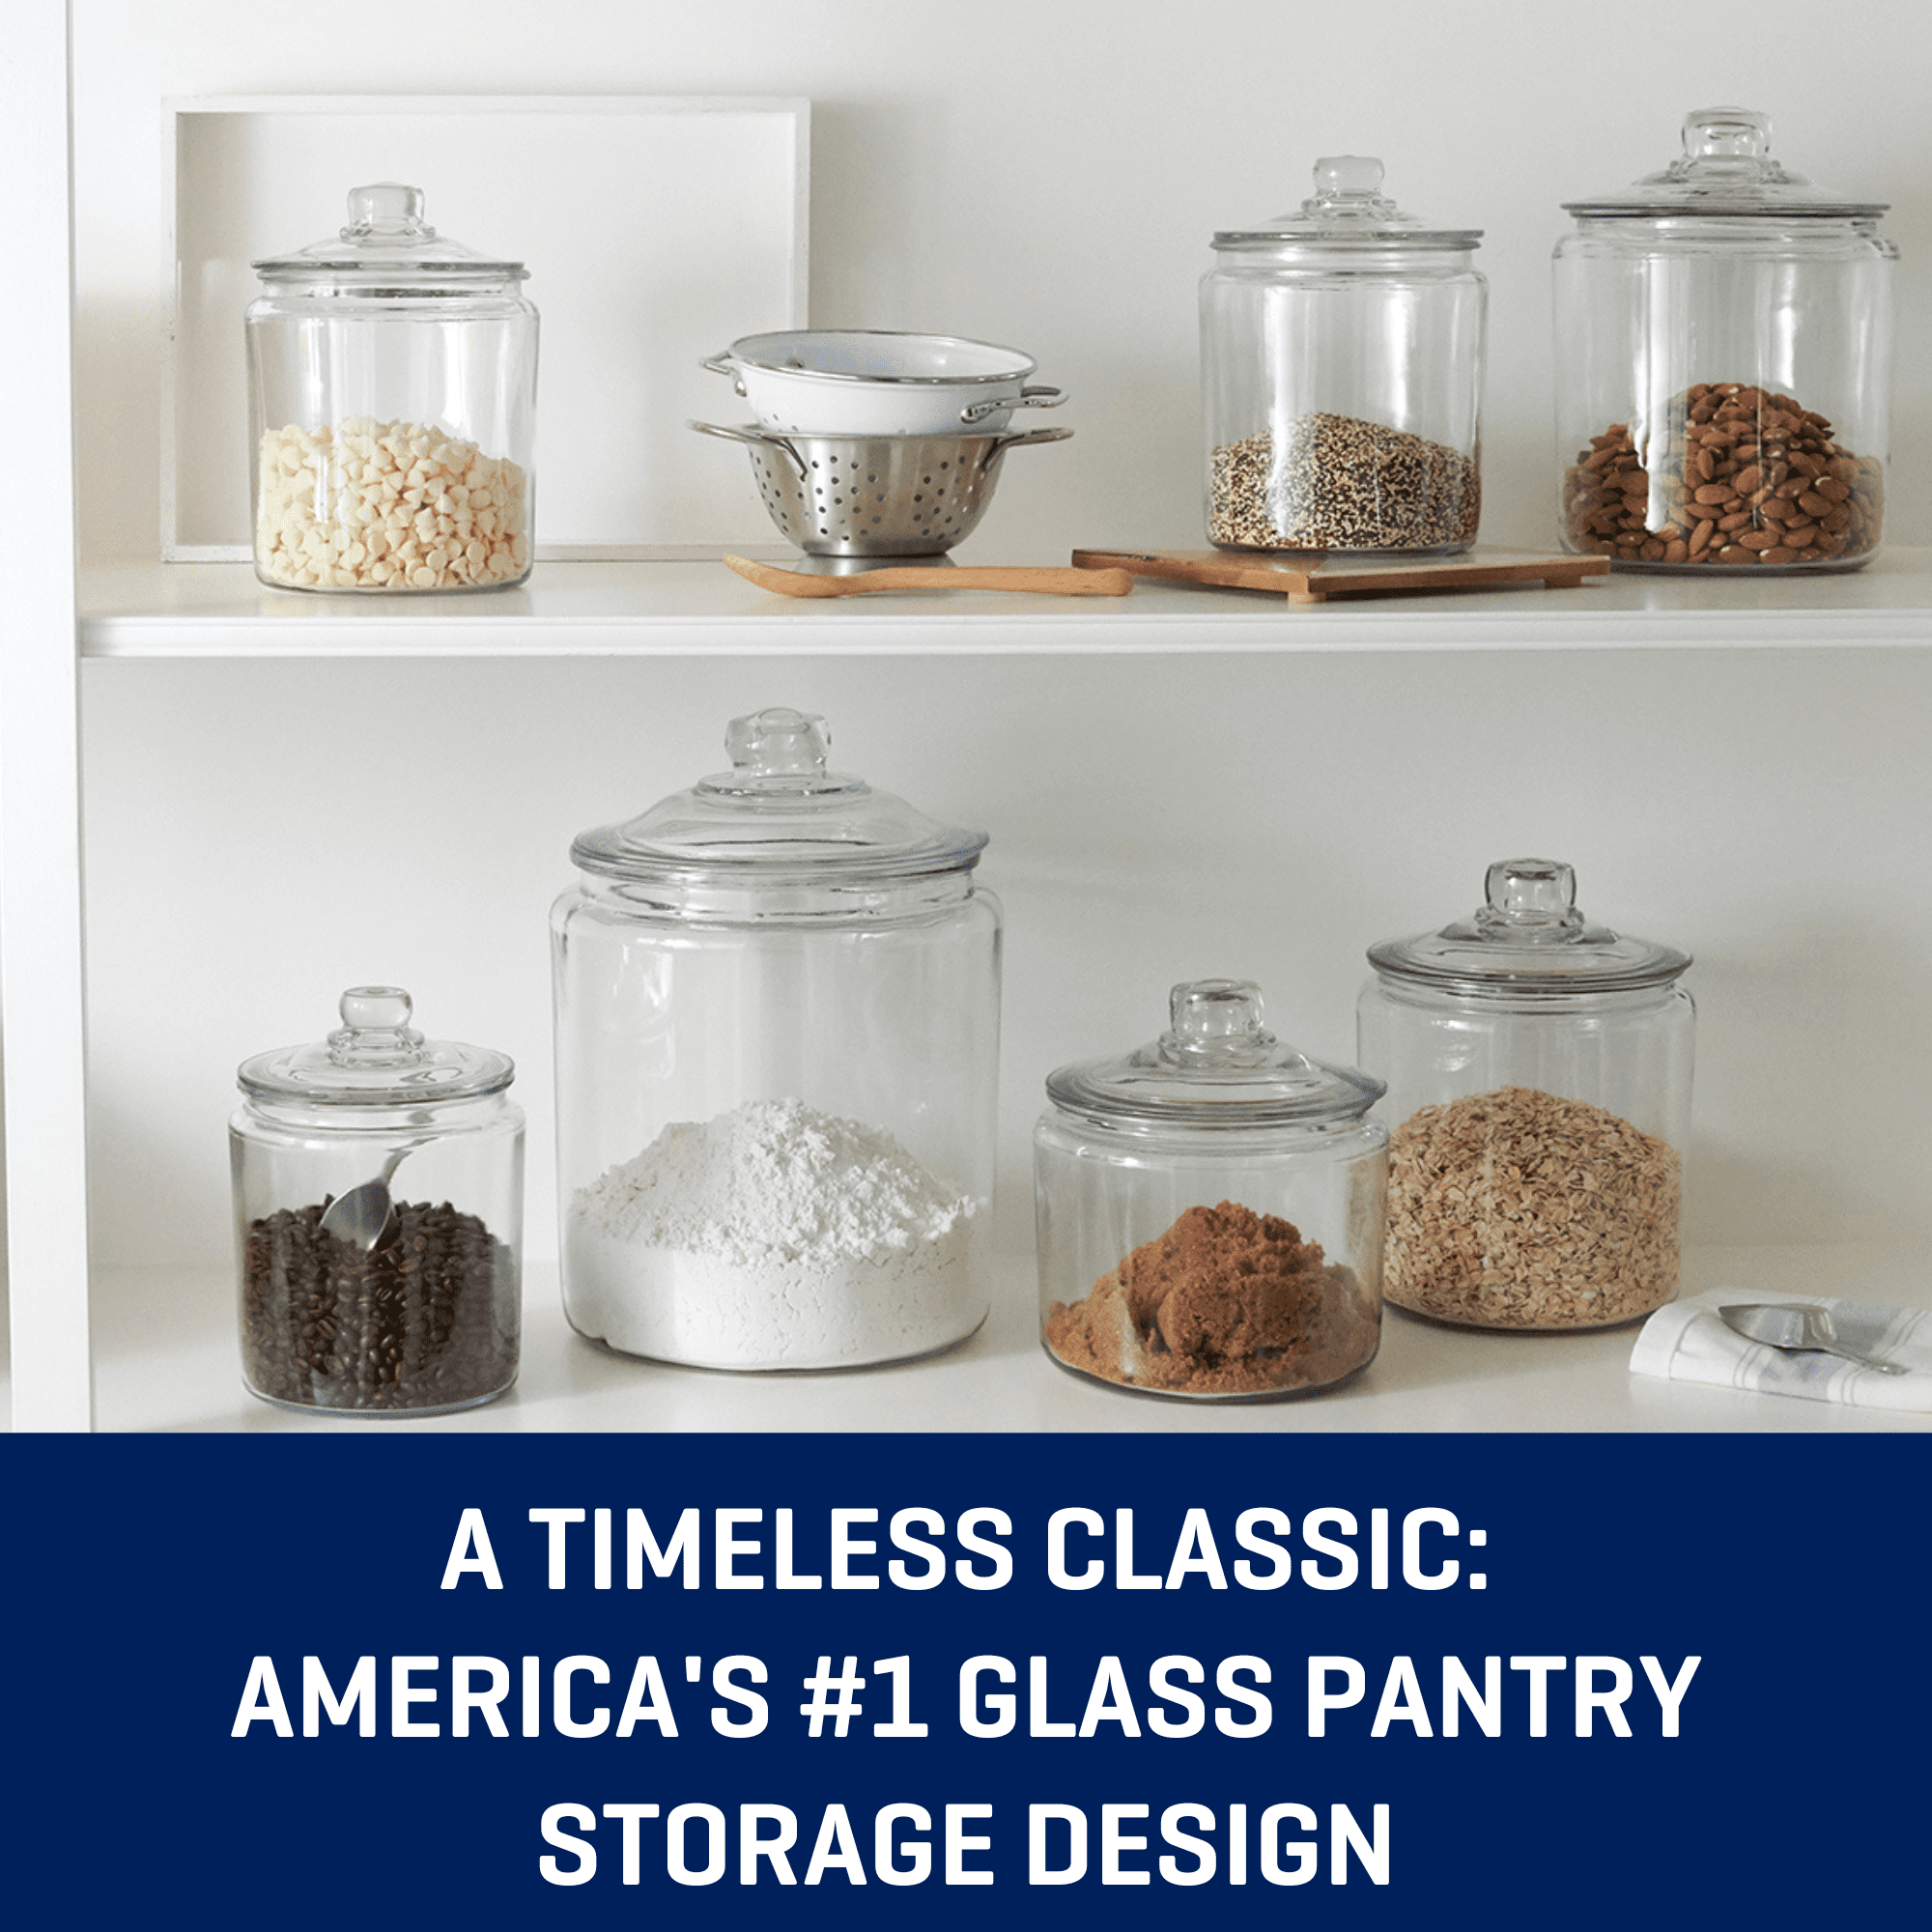 Heritage Hill 128-Oz. Large Glass Jar with Lid + Reviews, Crate & Barrel